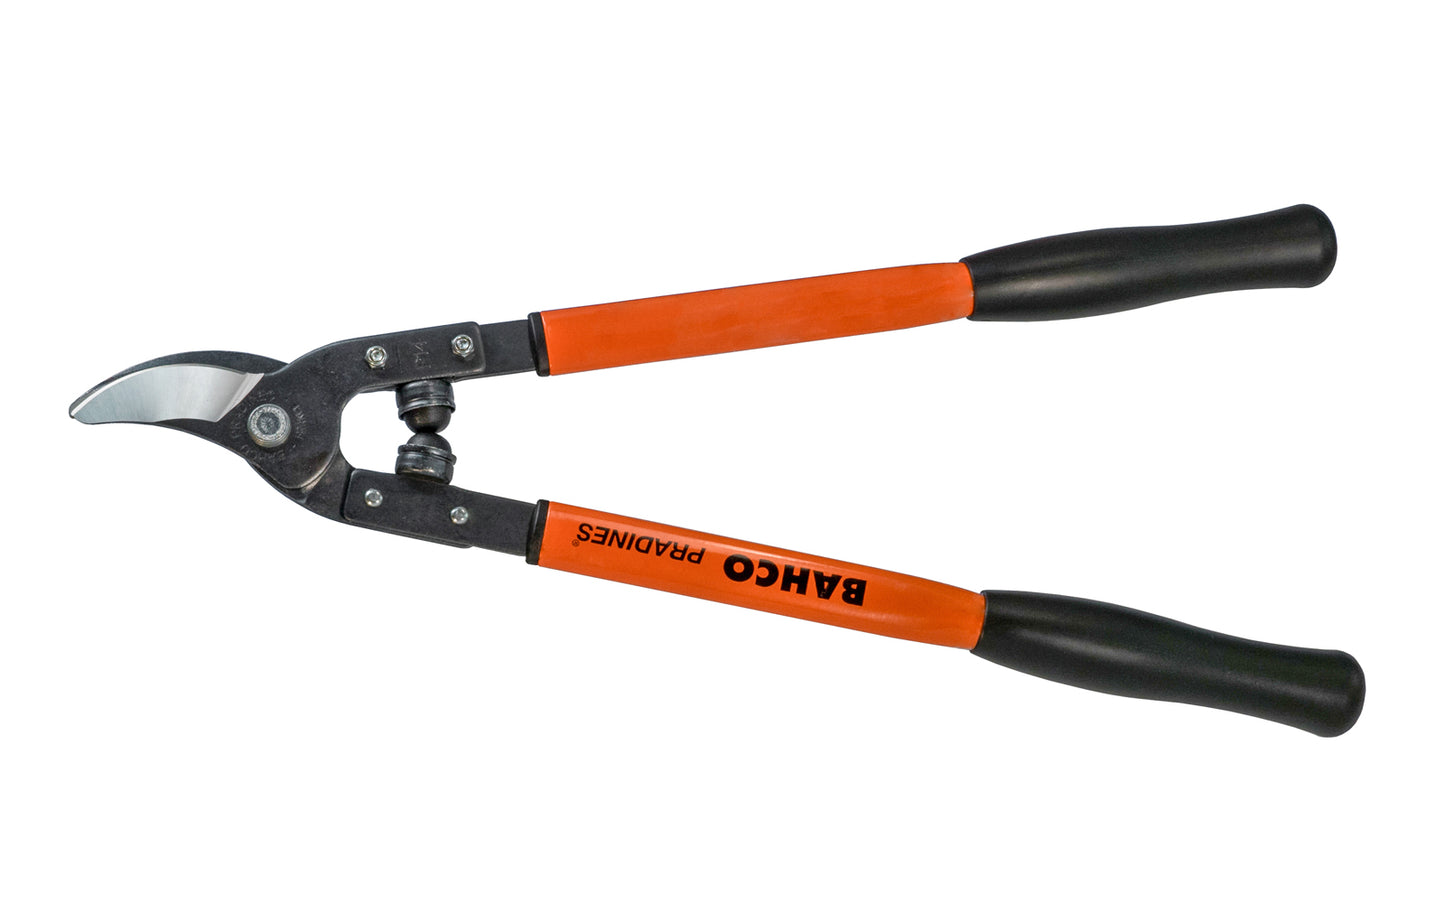 Bahco 20" Professional Bypass Loppers with Steel Handles. For pruning soft & green wood mainly in vineyards & orchards. Very sharp, professional ground blades ensure a clean cut. "California" style with narrow cutting head for easy access & quick, precise cuts. Model P14-50. Made in France. 7311518324667